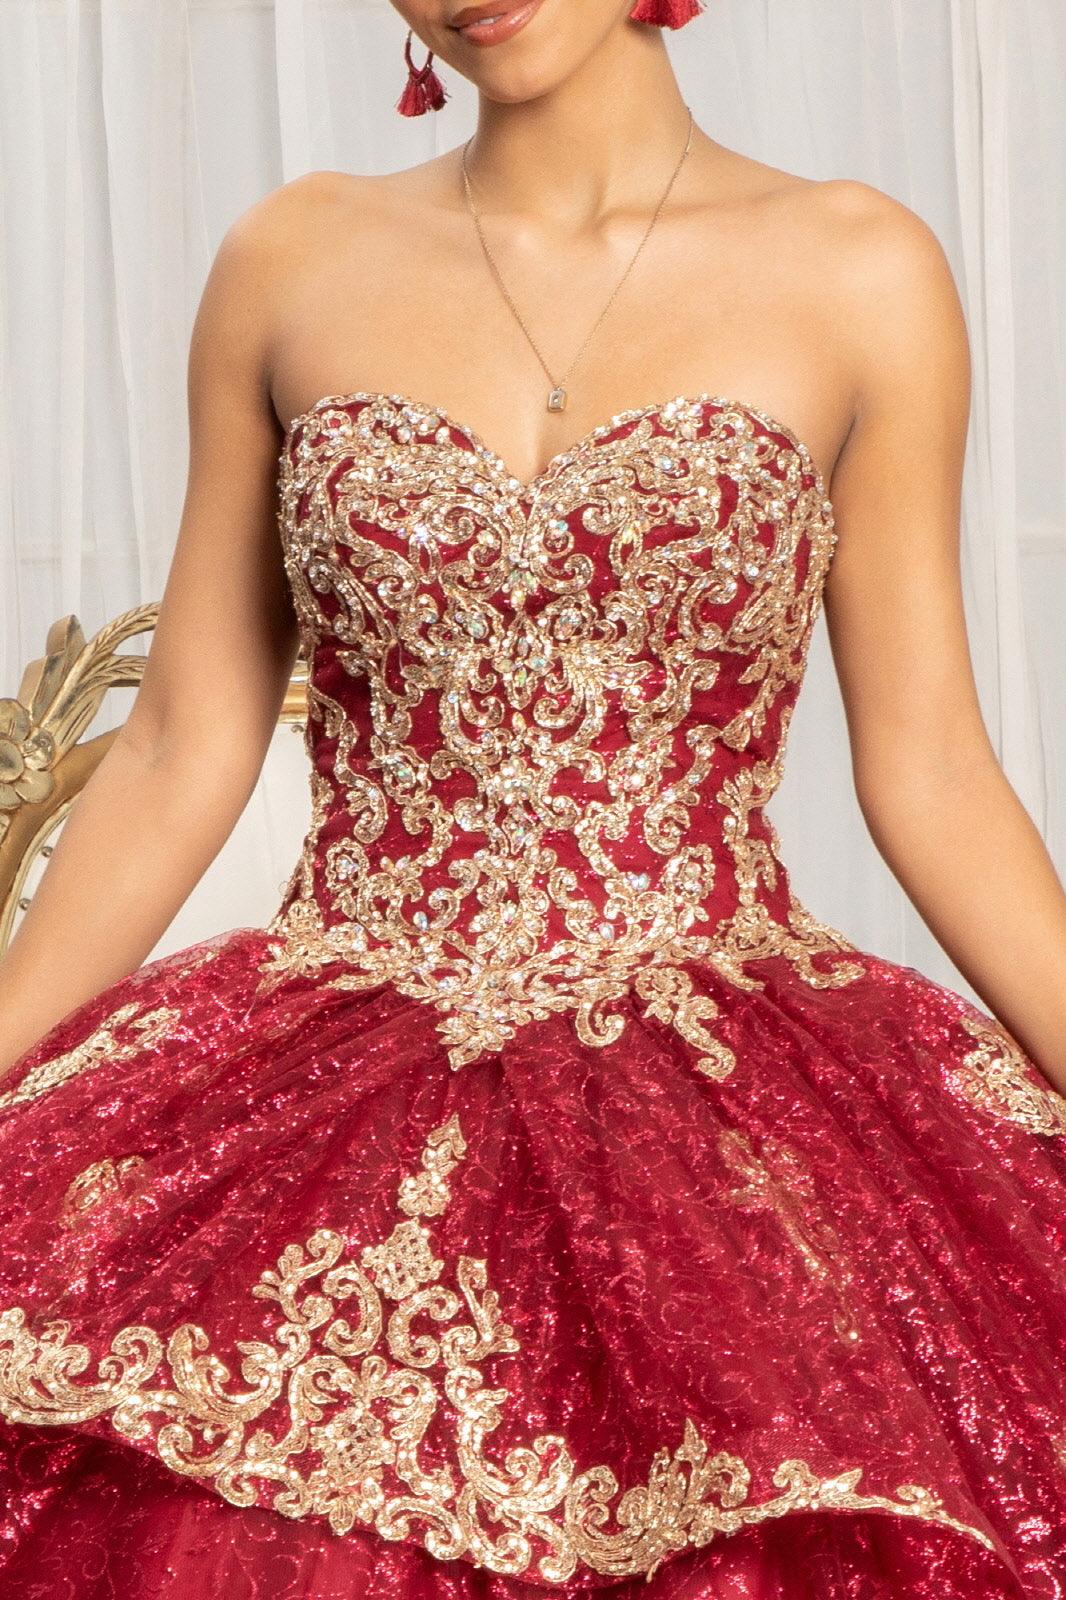 2022 Charming Dark Red Sequin Mermaid Shimmer Evening Gown With V Neck And  Sweep Train Perfect For Prom, Parties, And Formal Events From Dress1950s,  $94.98 | DHgate.Com